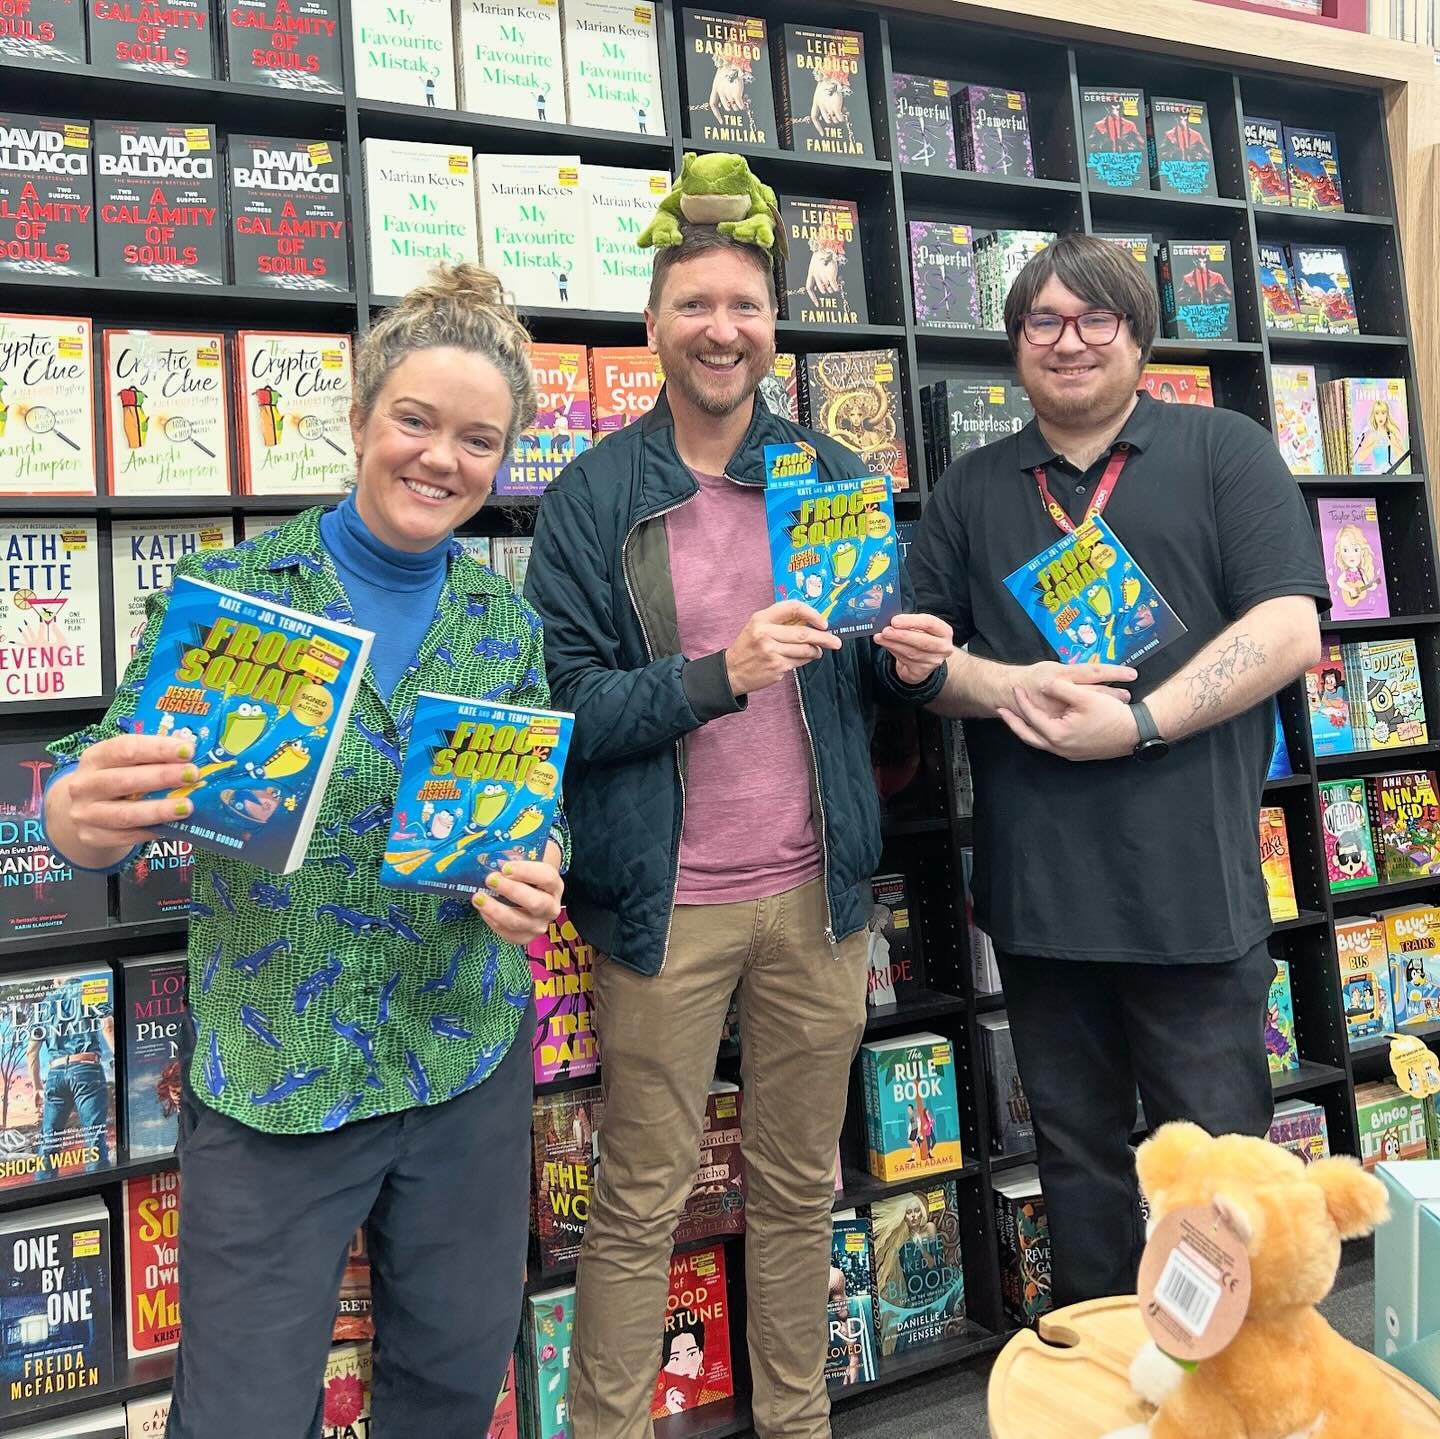 We&rsquo;ve had a ball this month being Book of The Month @qbdbooks 🐸 🎉 It&rsquo;s been great getting into lots of their stores and meeting the fantastic booksellers. We so appreciate the support! A few picks from recent store visits attached. Heap